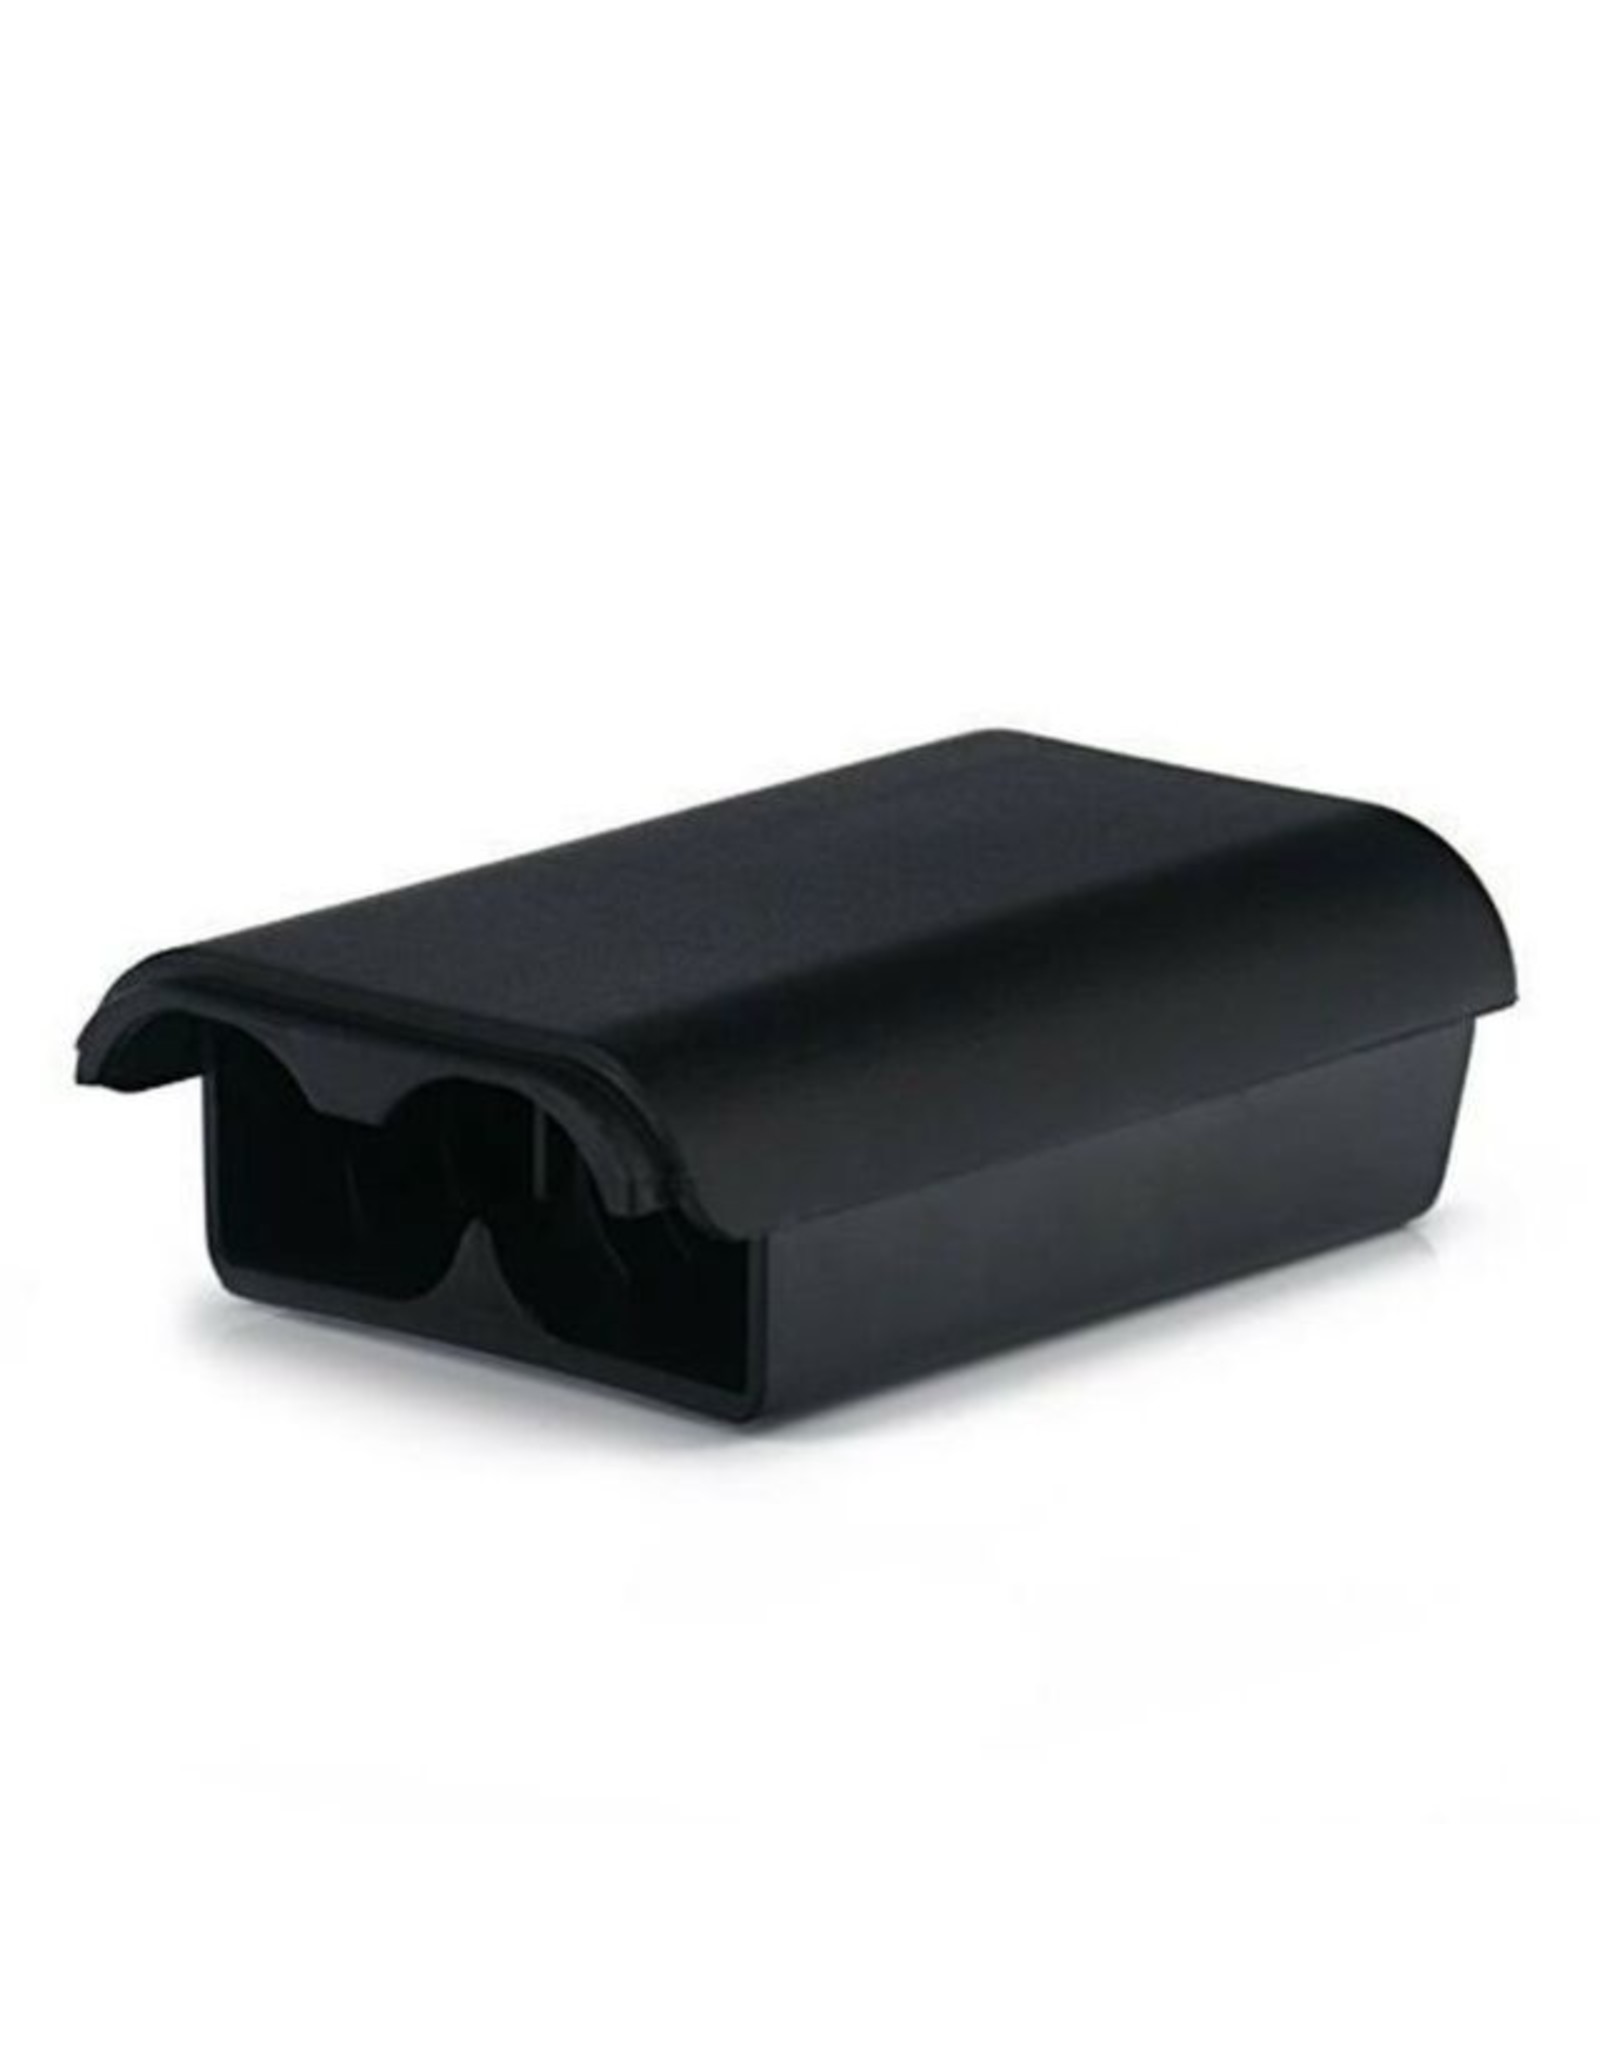 Xbox 360 Xbox 360 Controller Battery Cover - Black, 3rd Party (Brand New)